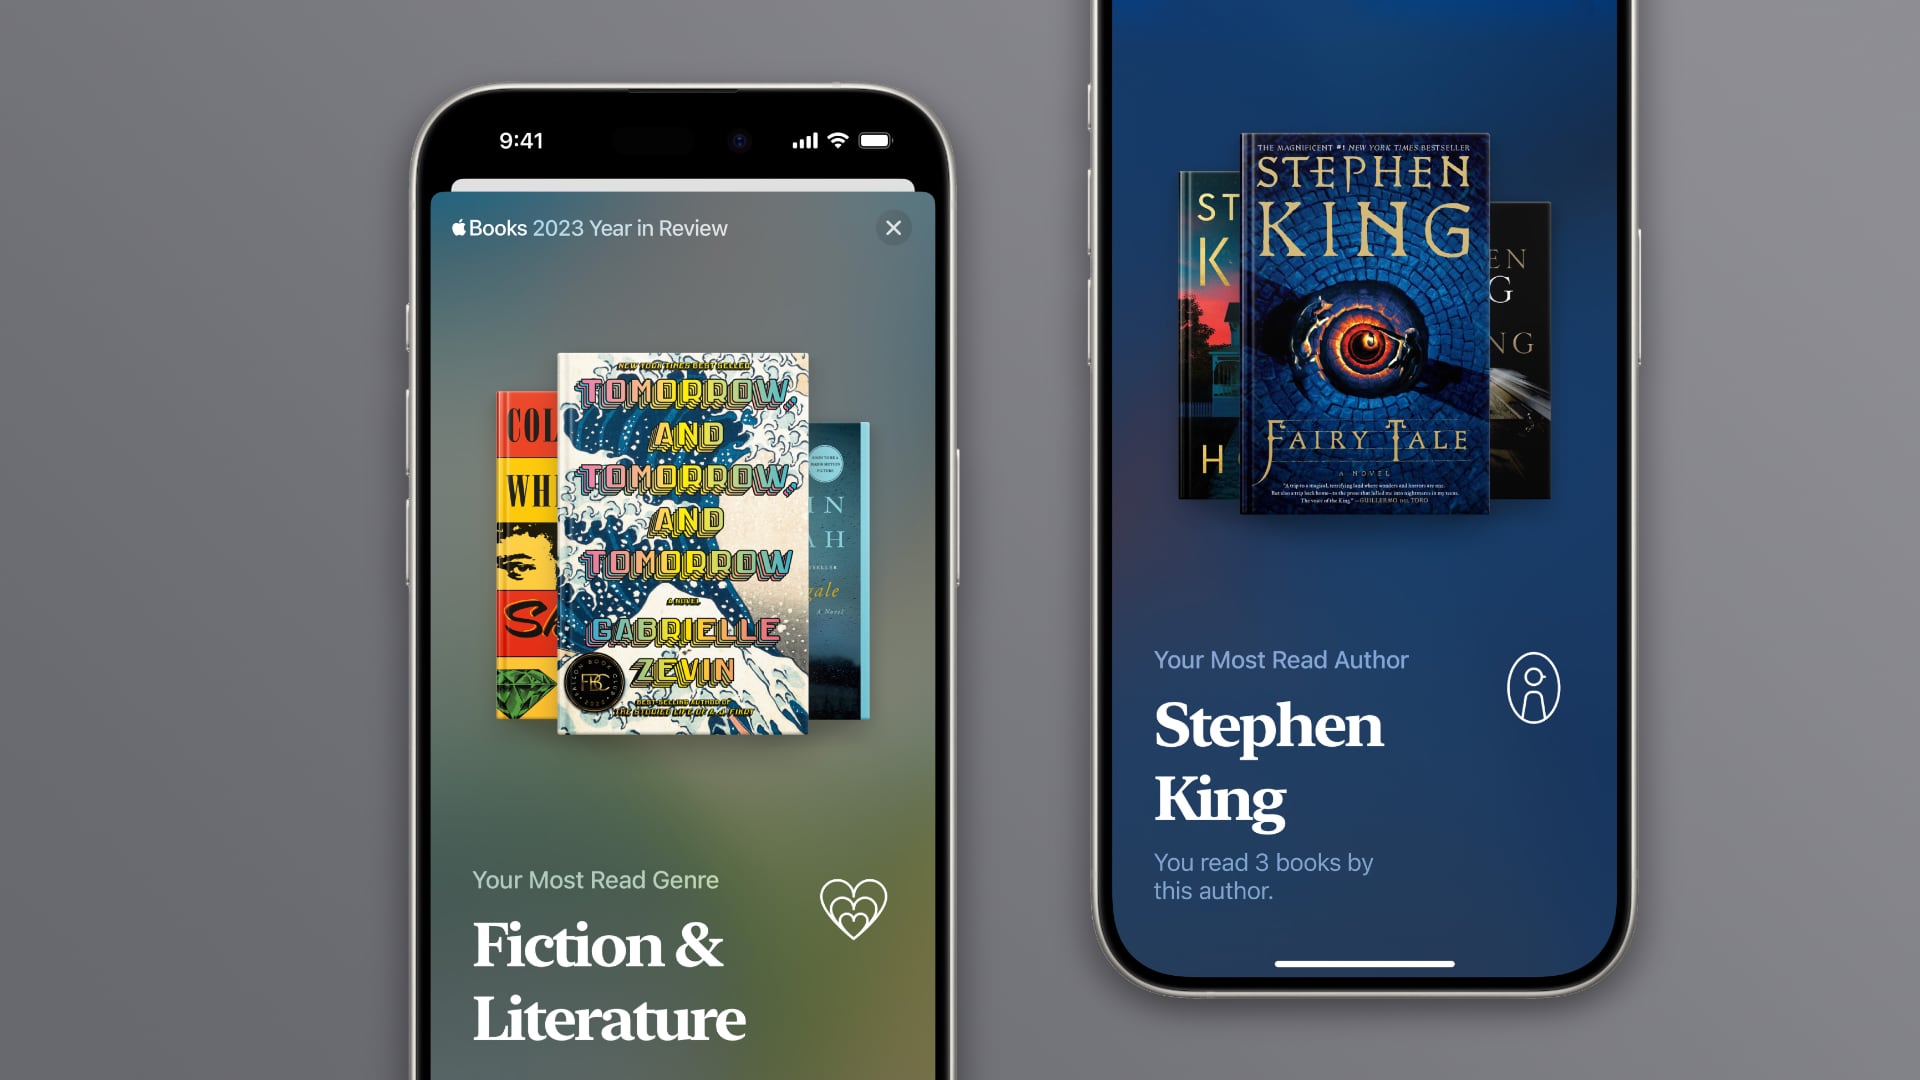 The most read author and genre in Year in Review on Apple Books